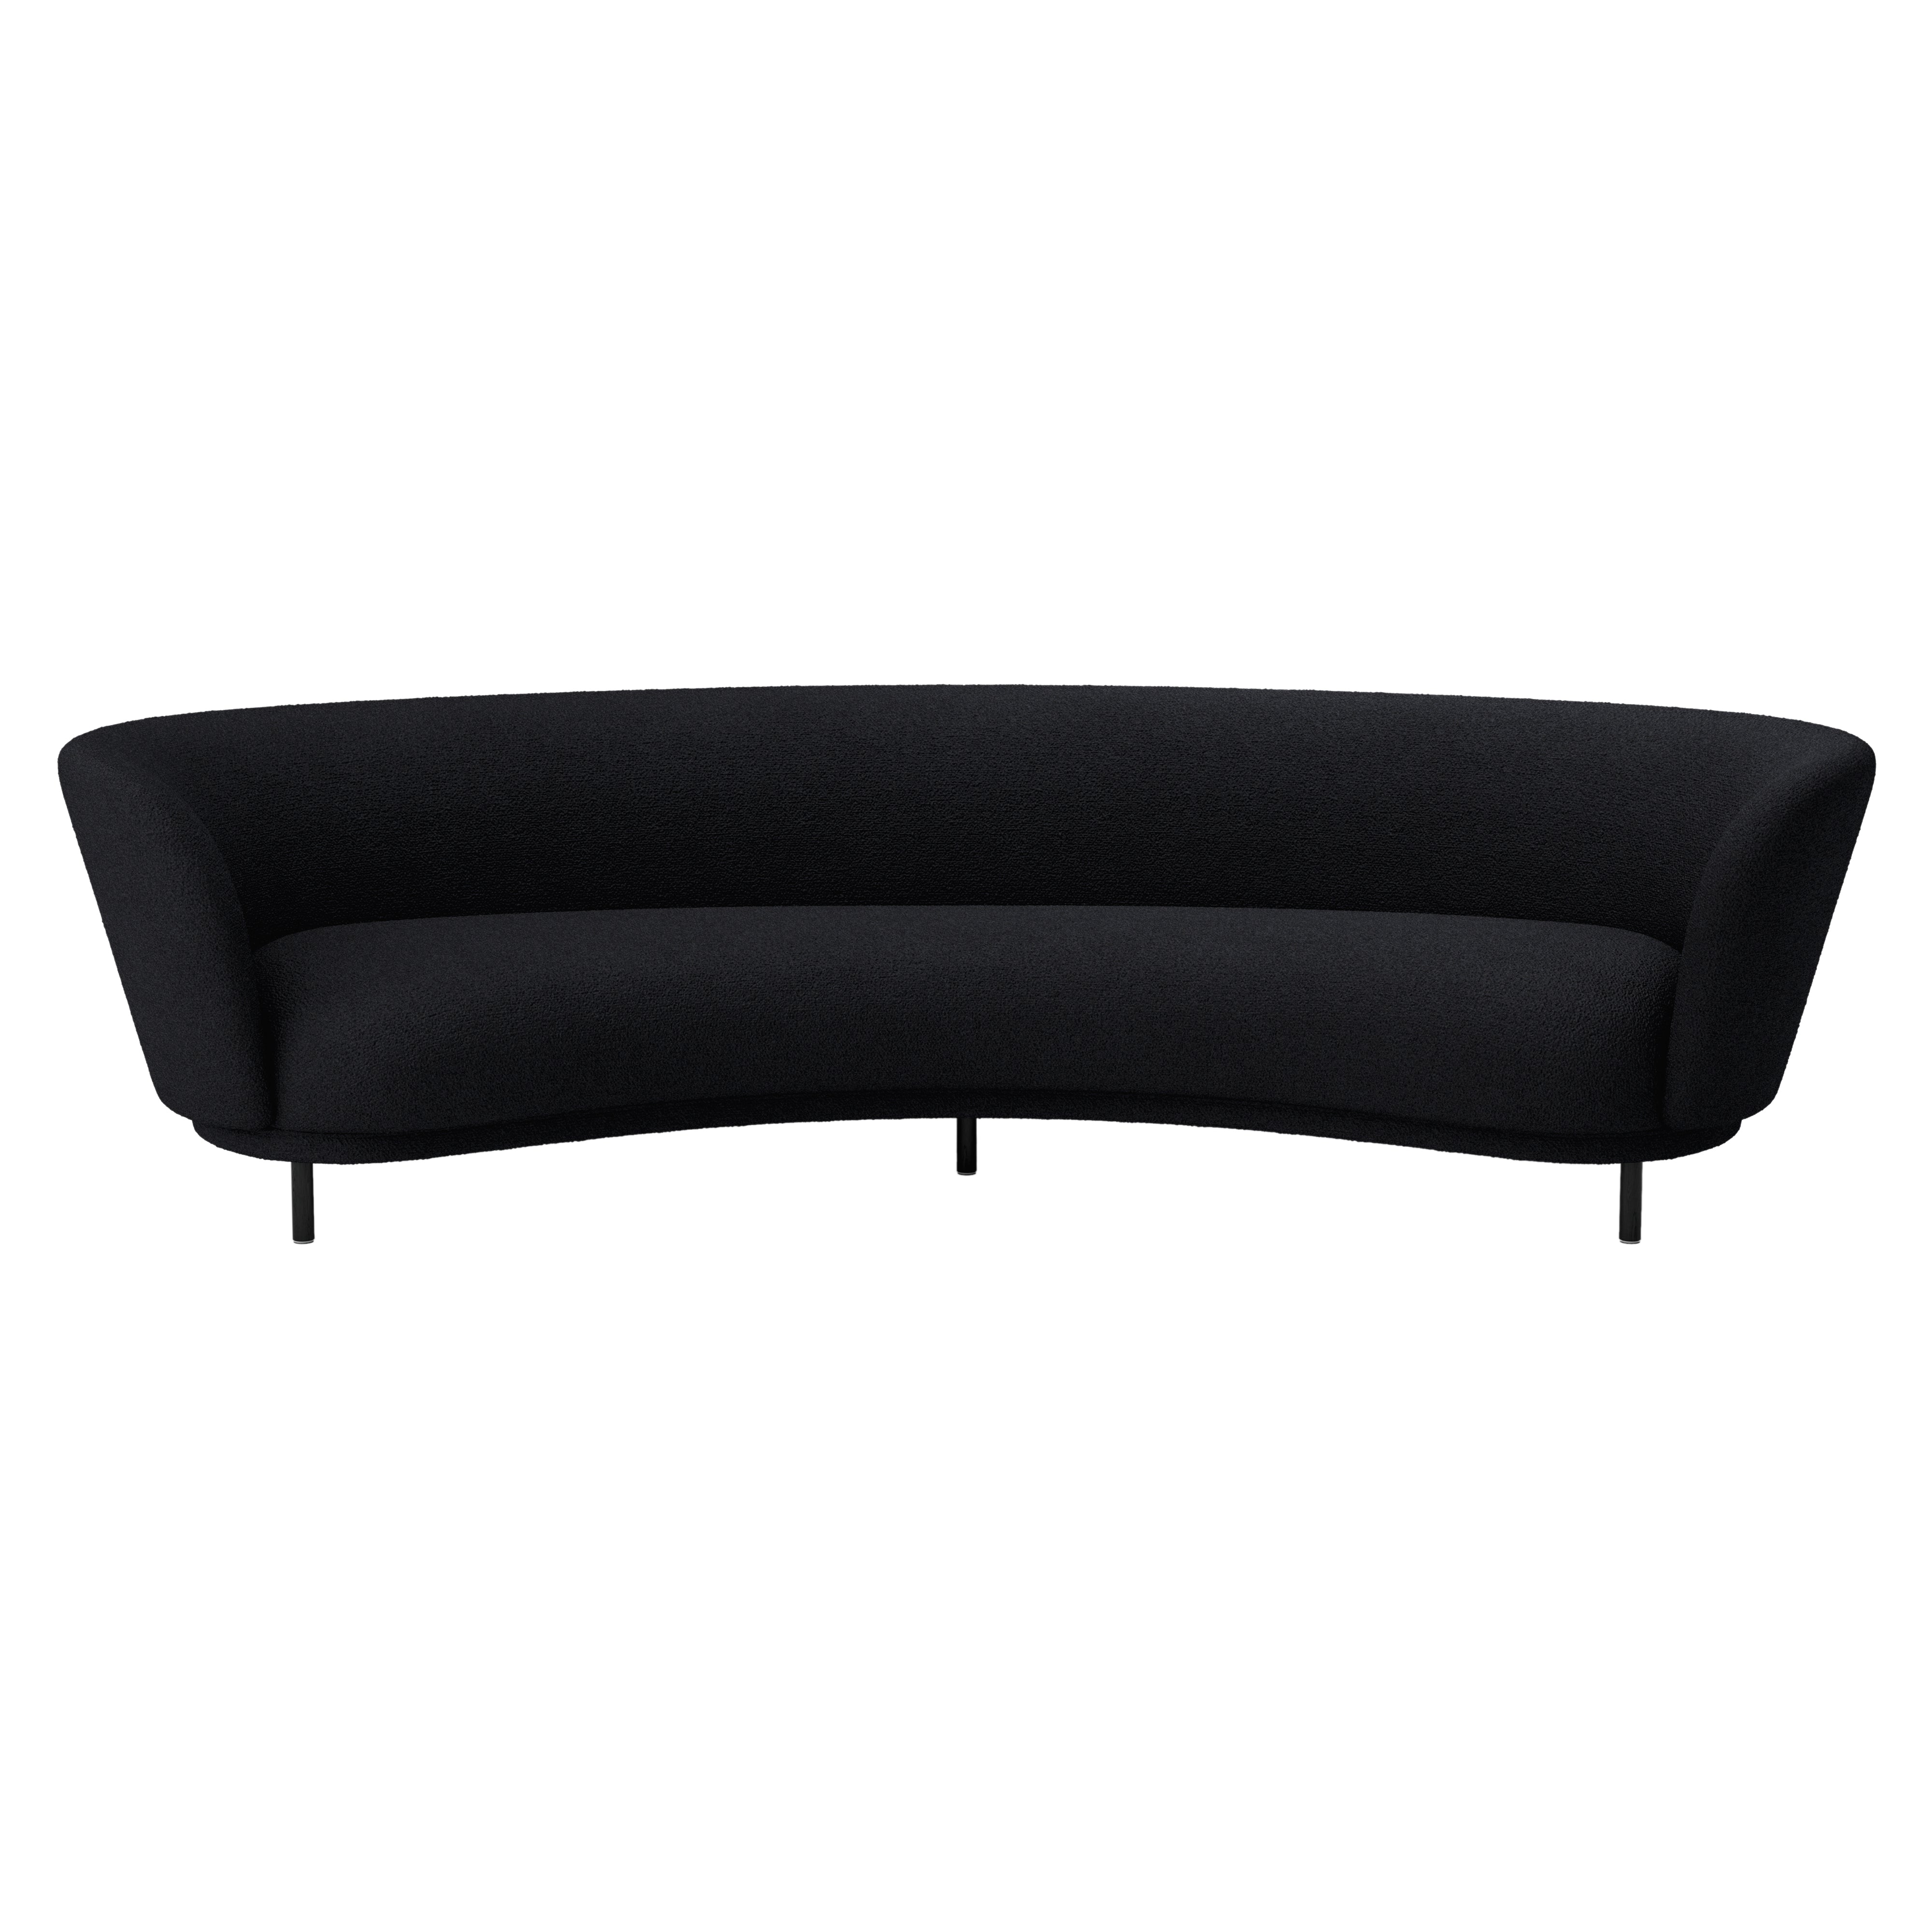 Dandy 4 Seater Sofa: Black Stained Oak